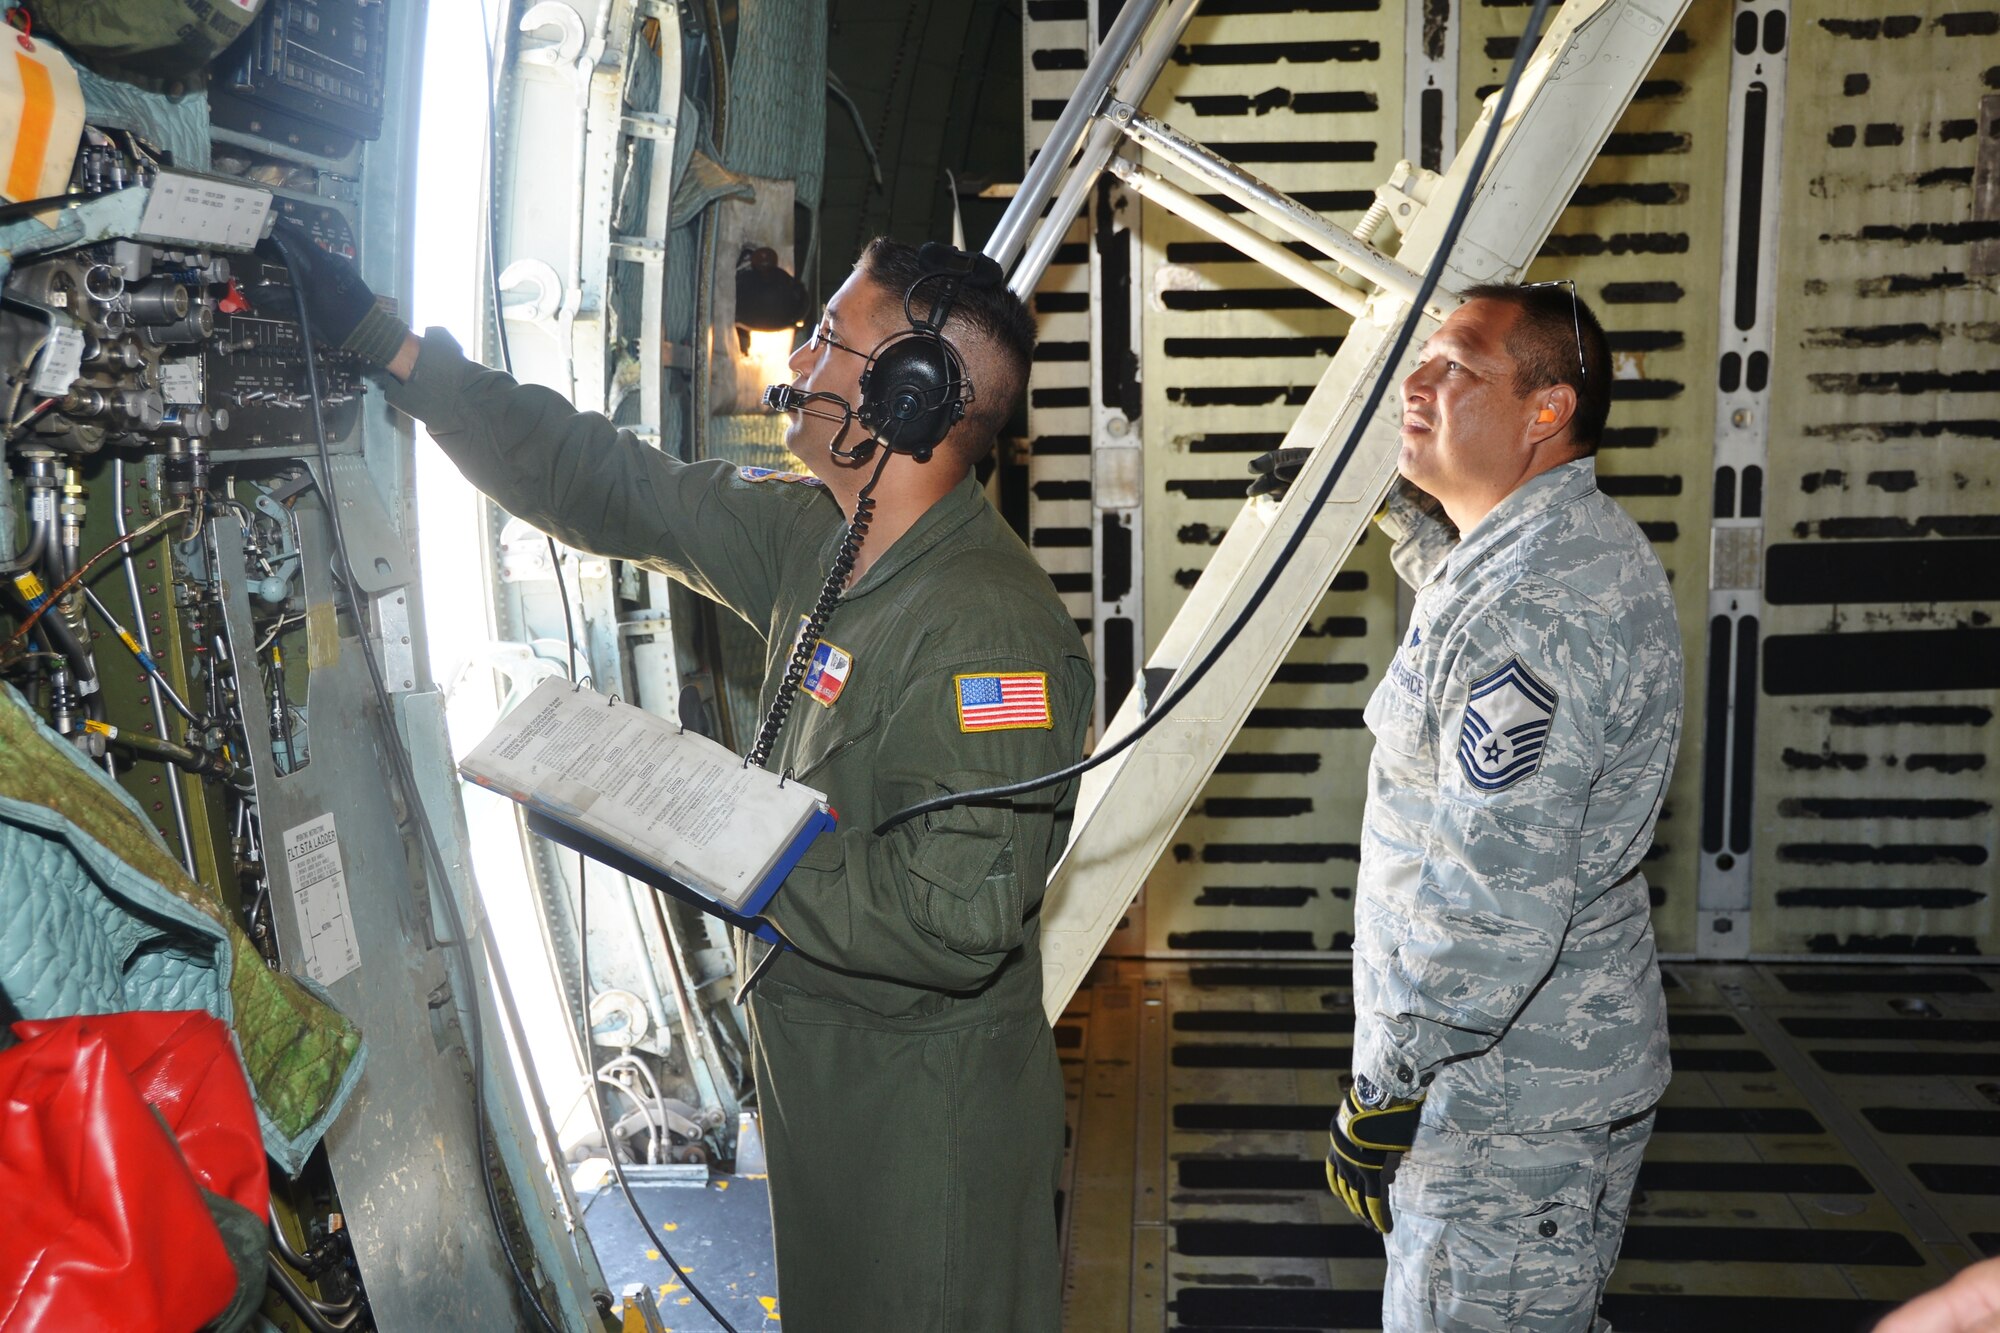 Loadmaster Senior Master Sgt. David Delgado, right, 356th Airlift Squadron looks on as Master Sgt. Michael Meras, 433rd Airlift Control Flight, Joint Base San Antonio-Lackland, Texas, controls to open the forward visor of a C-5A Galaxy during Air Force Reserve Command’s Patriot Hook 2014 exercise at Naval Air Station, North Island, Calif., 24 April, 2014. (U.S. Air Force photo/Senior Master Sgt. Minnie Jones)
